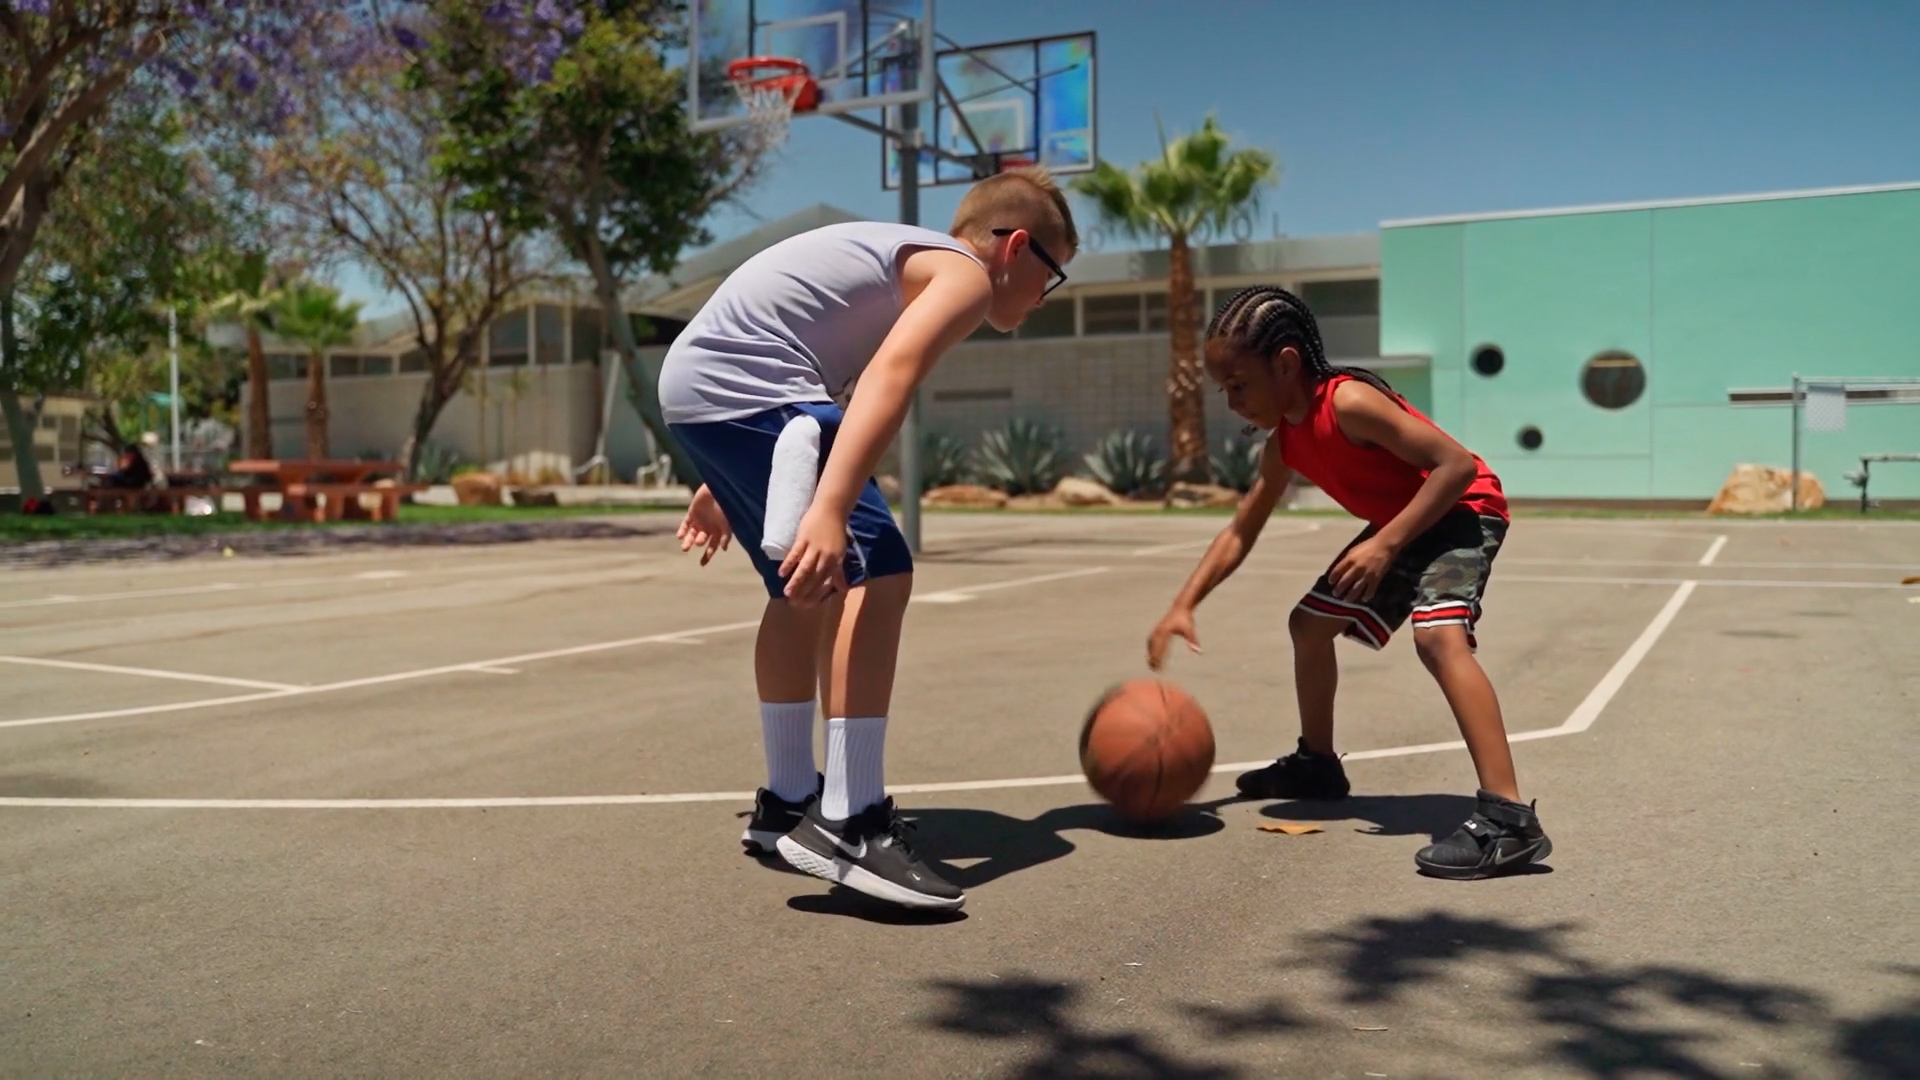 Caucasian boy with glasses playing basketball with younger black boy on an outdoor court in the sun with a palm tree in the background